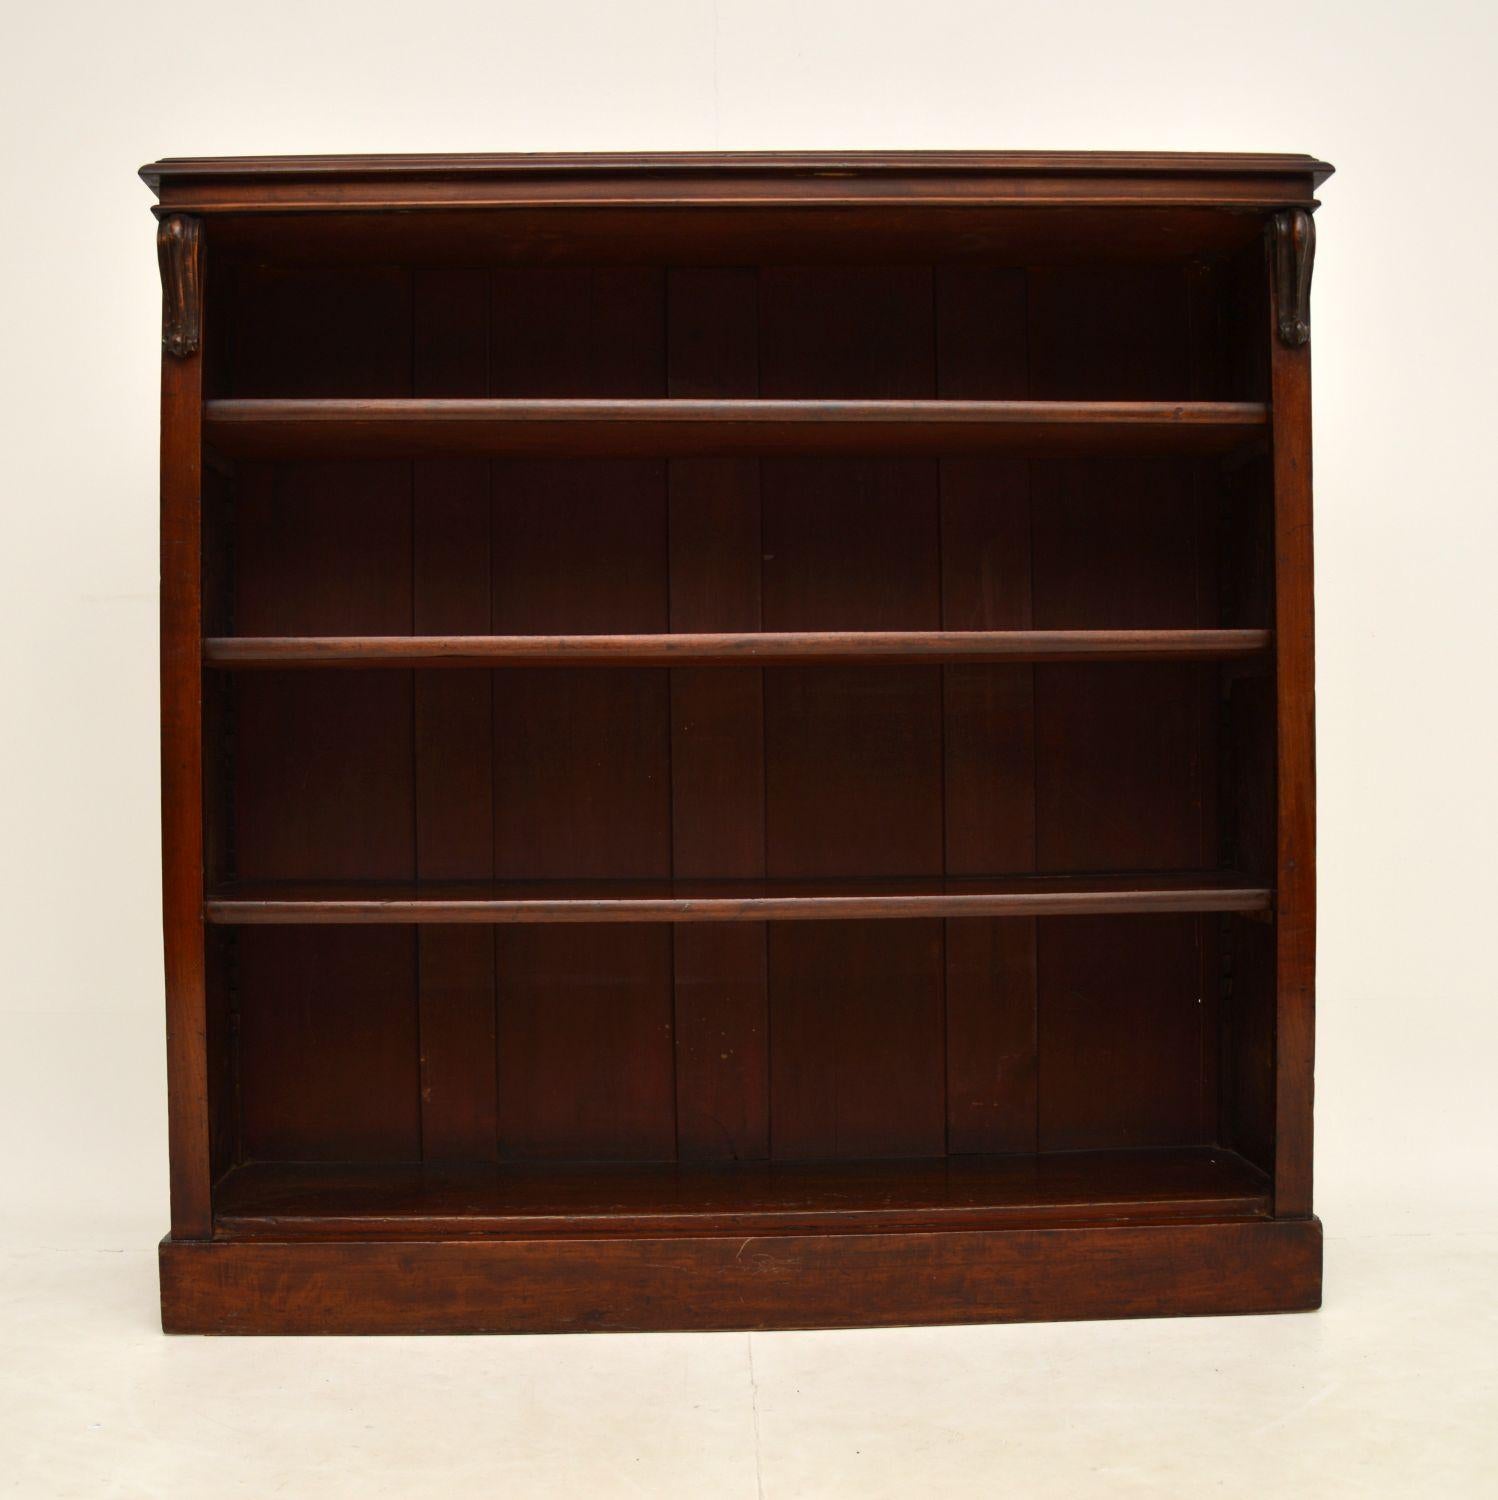 A fantastic antique William IV period mahogany open bookcase, dating from around the 1830-1840 period.

This has plenty of charm and character, and it is a very useful size. The shelves are all removable and adjustable, with shark teeth shelf